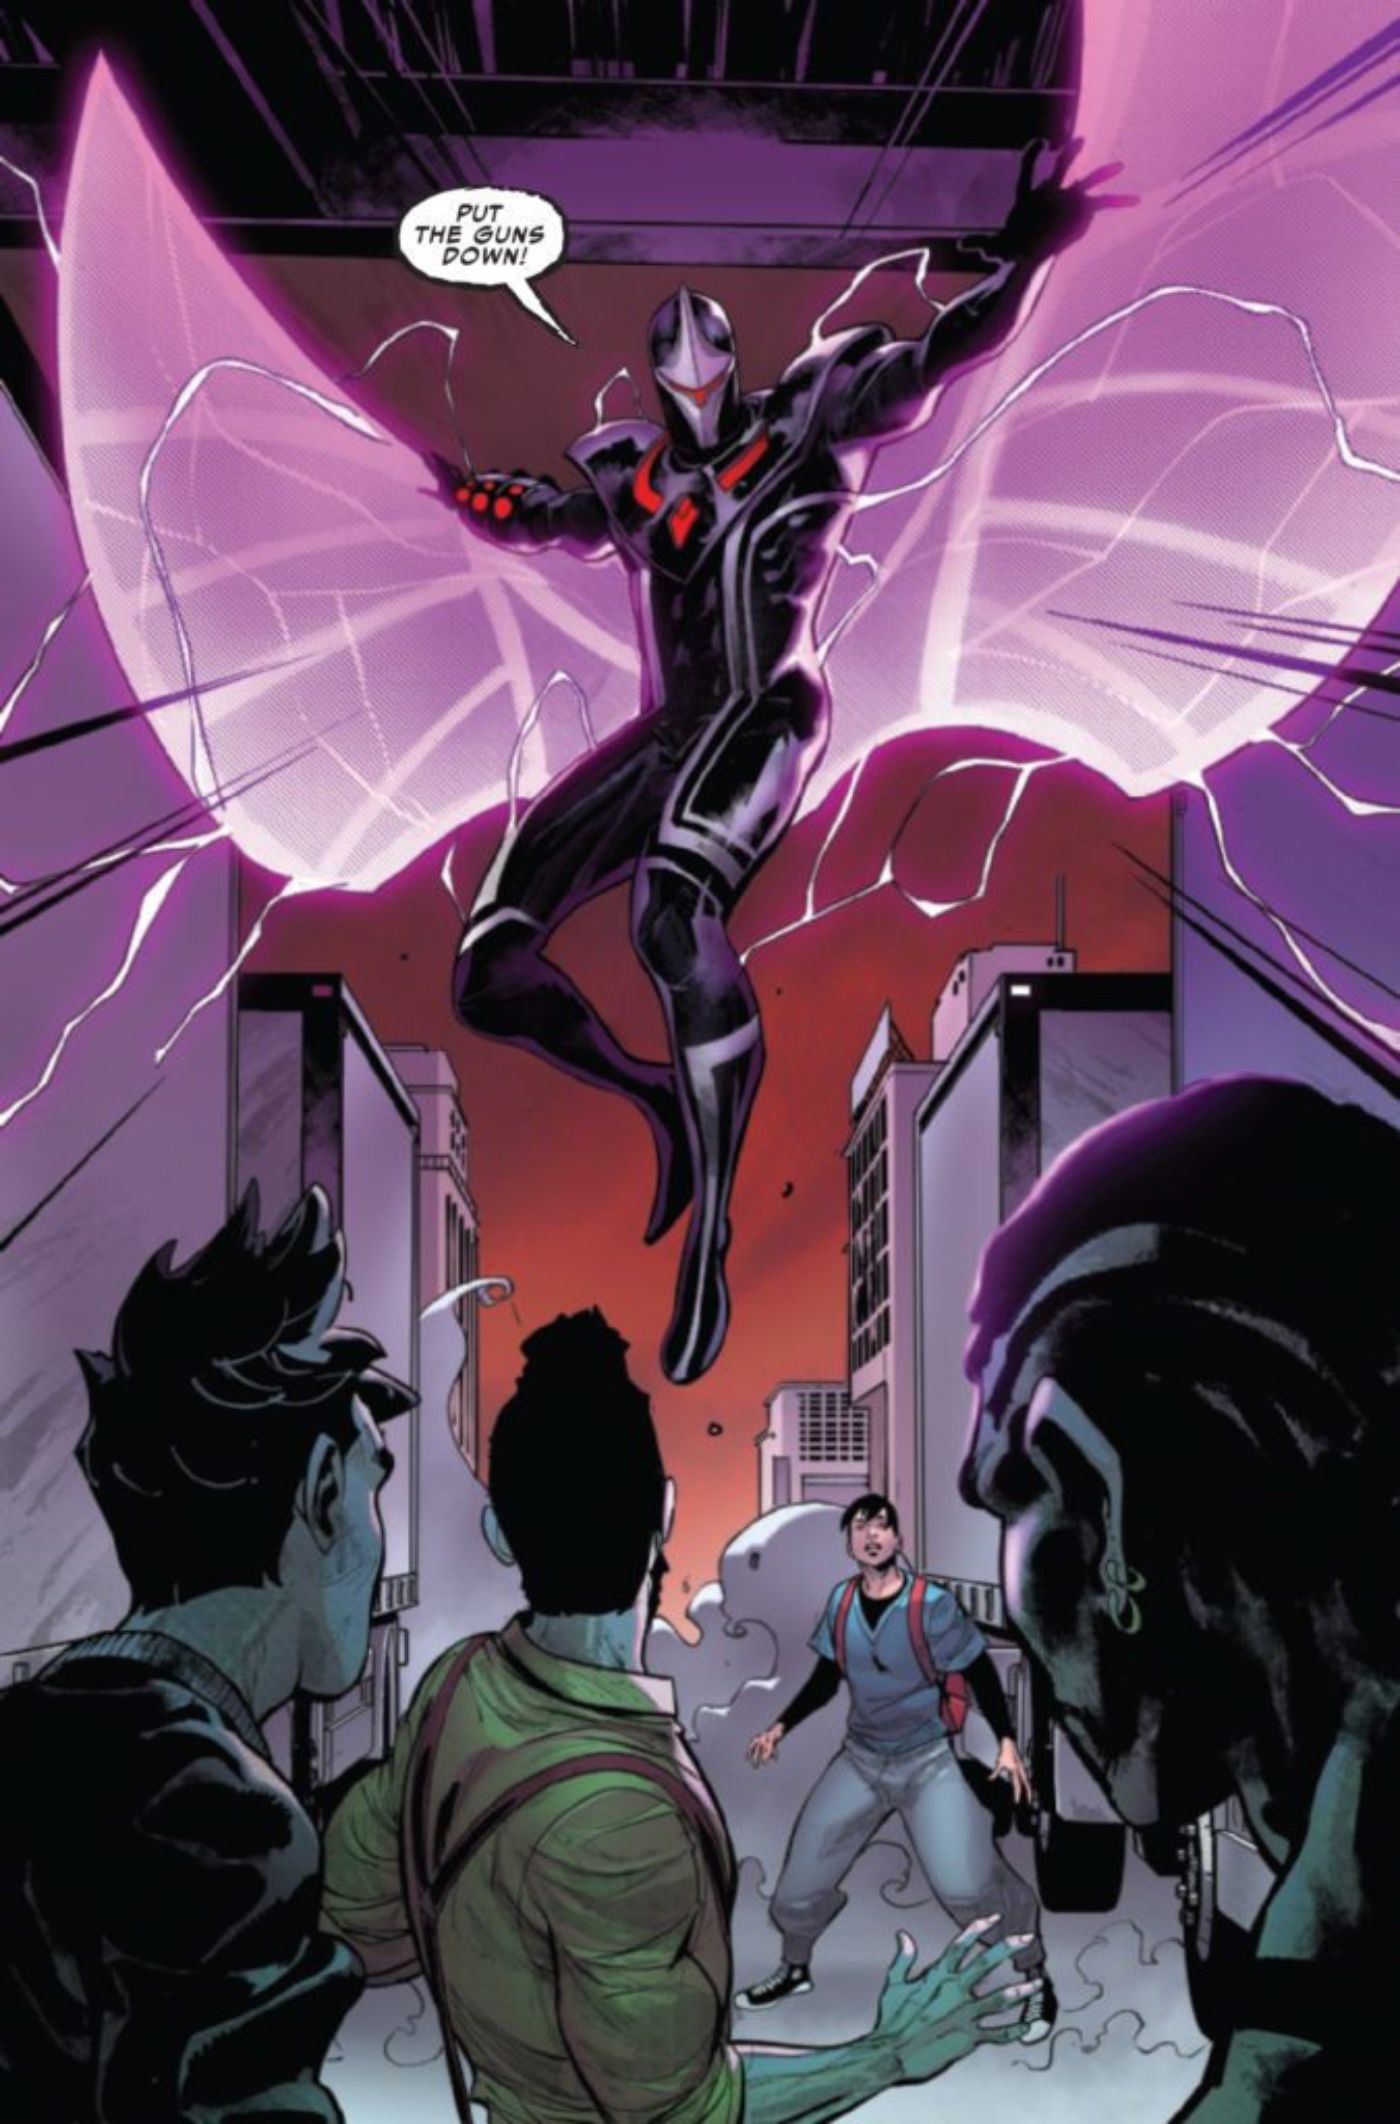 Darkhawk flying above, ordering the robbers to drop their guns